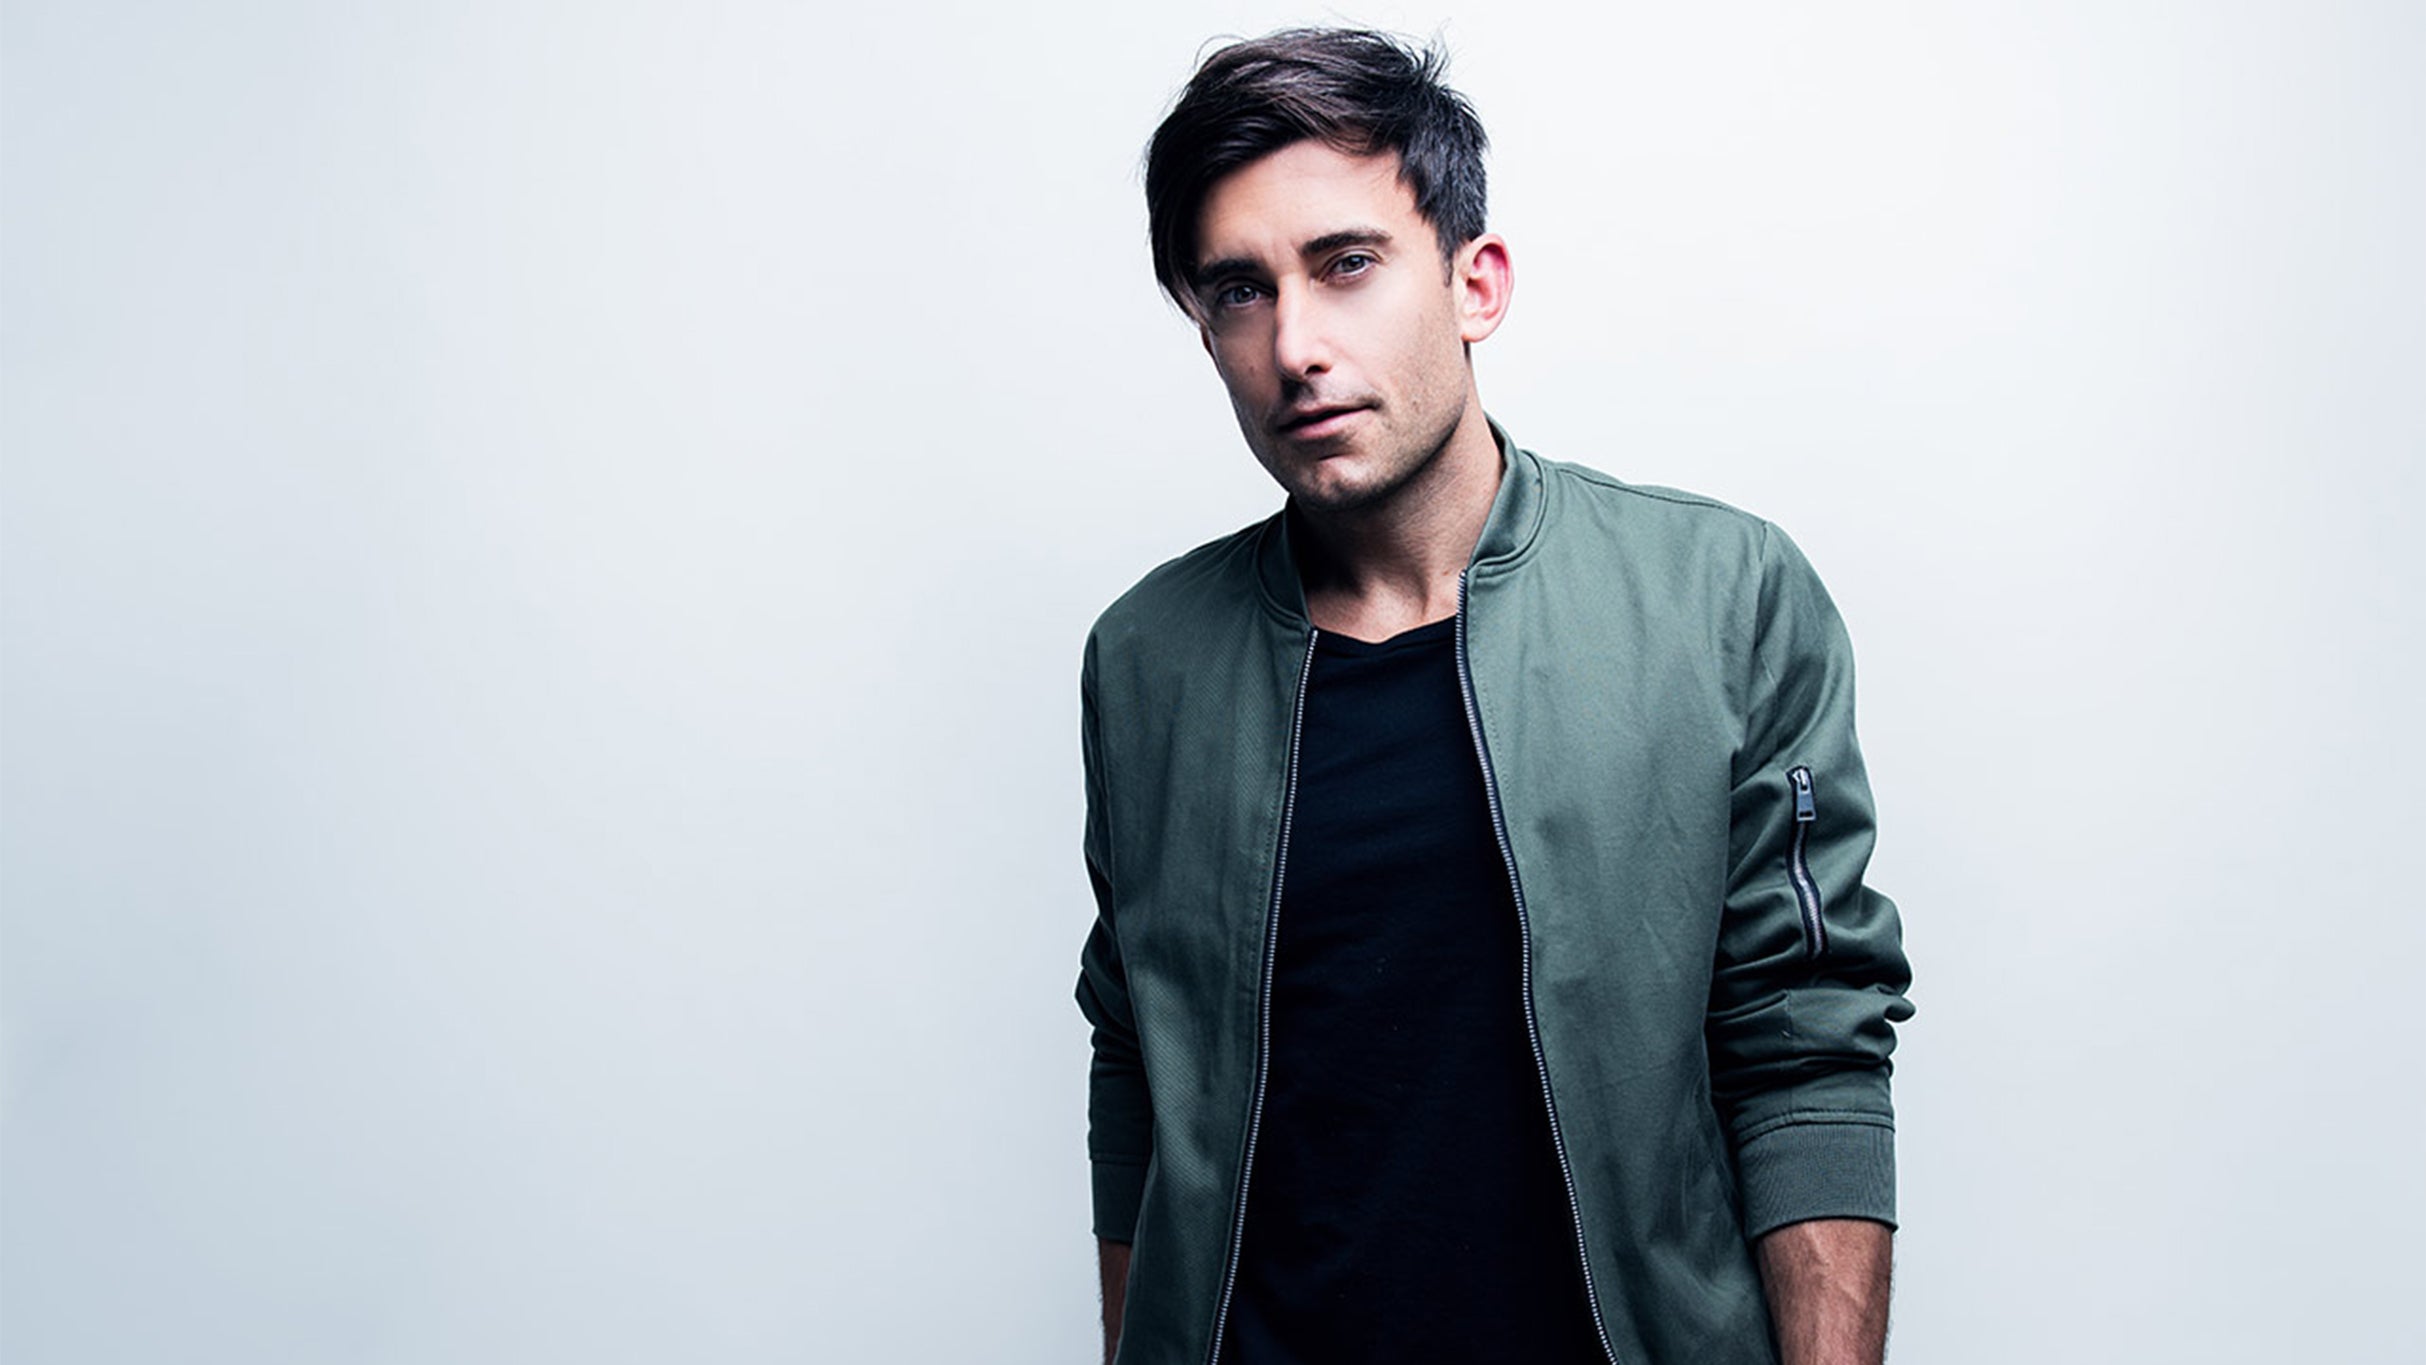 Phil Wickham - I Believe Tour free pre-sale code for early tickets in Naperville